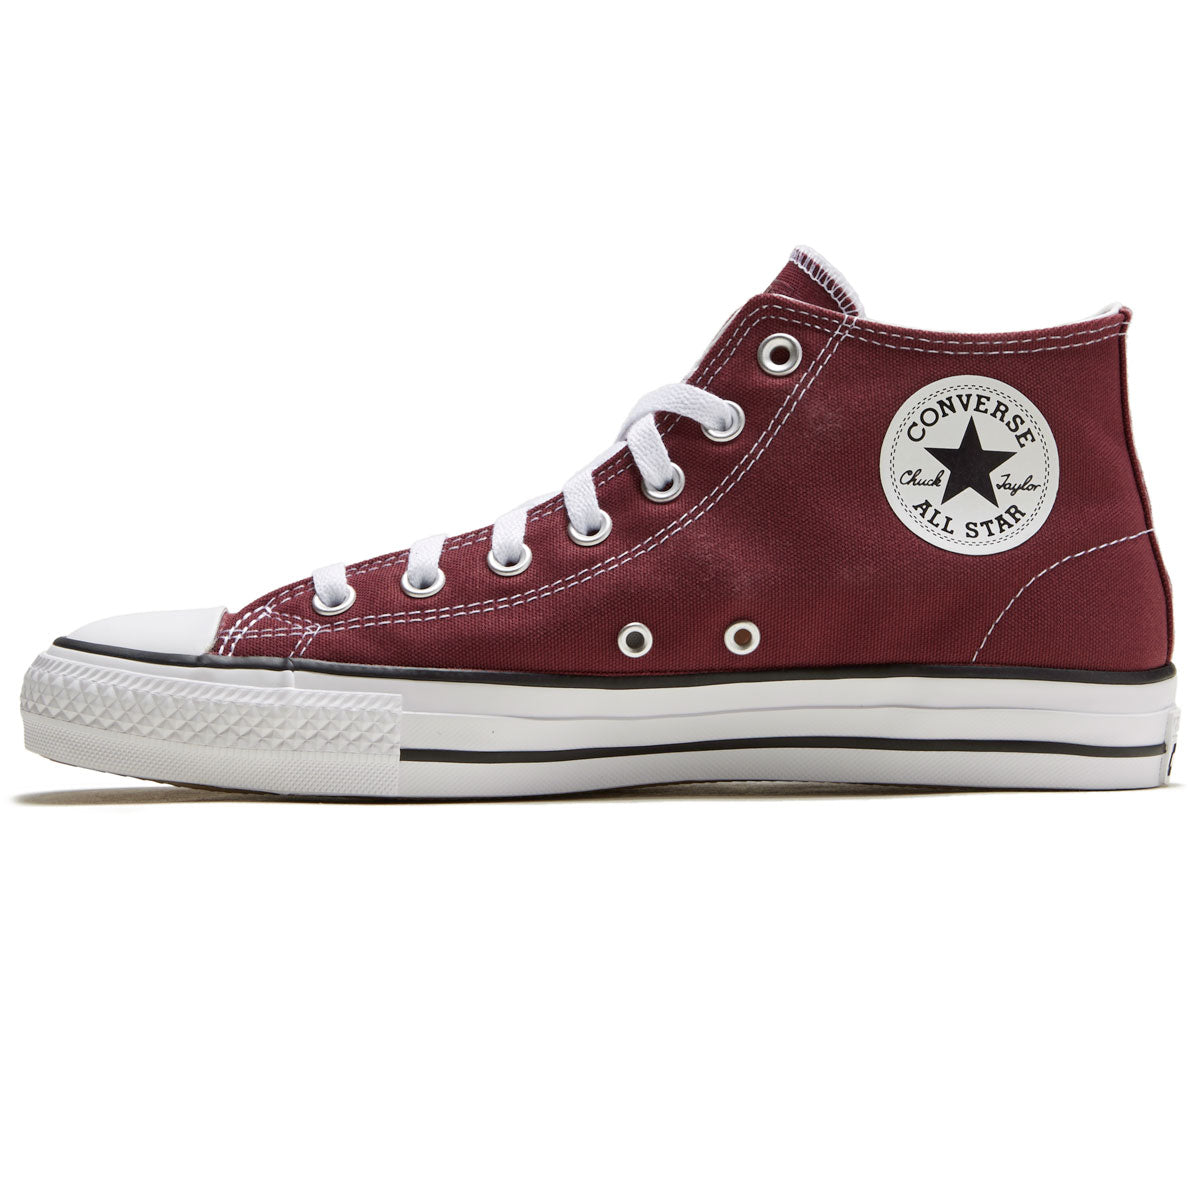 Irrigatie Transparant Pijler Converse Chuck Taylor All Star Pro Mid Shoes - Cherry Vision/White/Whi – CCS